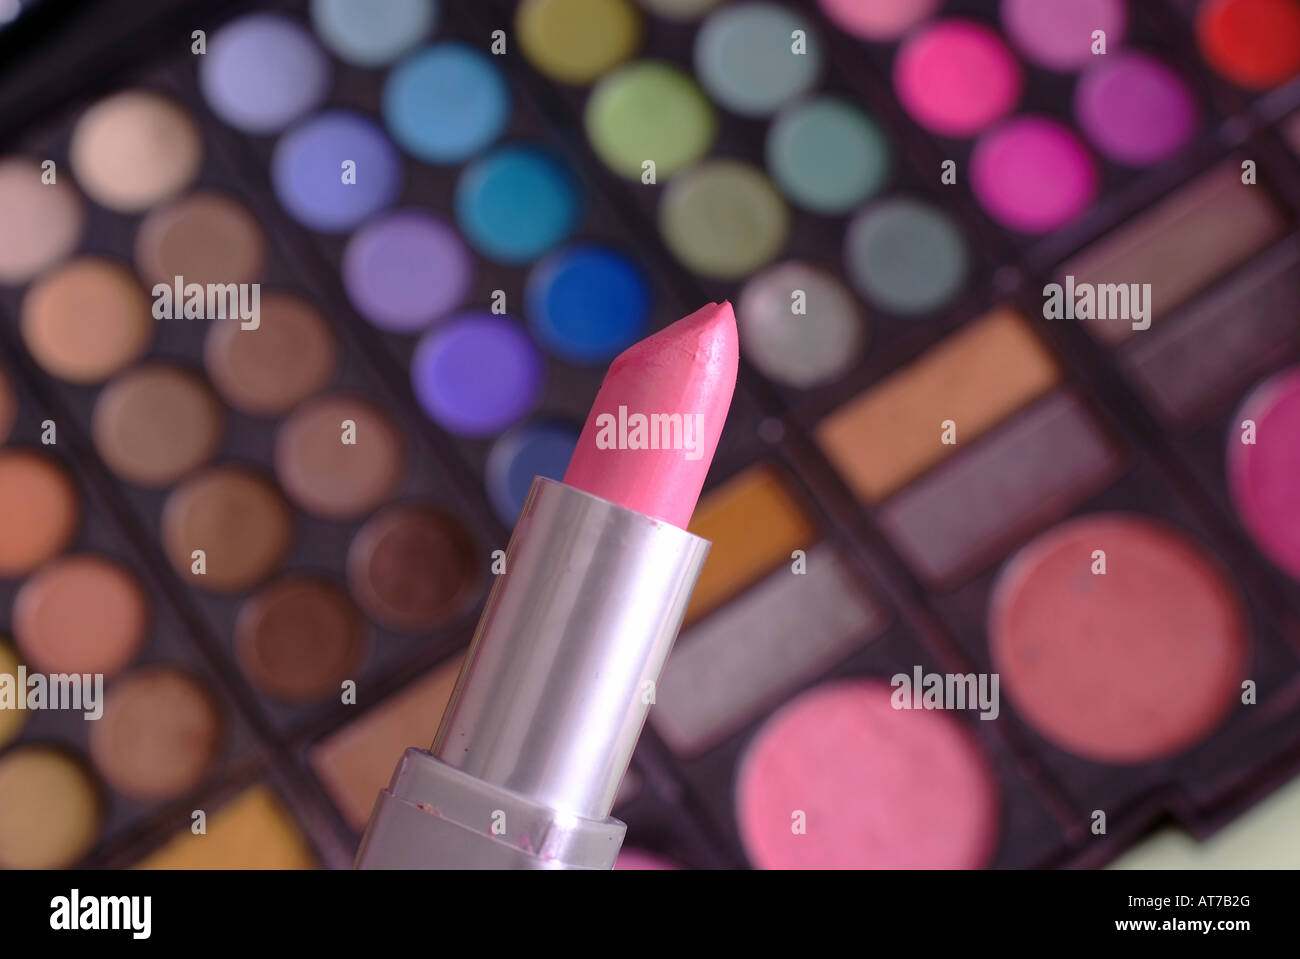 a single lipstick in front of colors Stock Photo